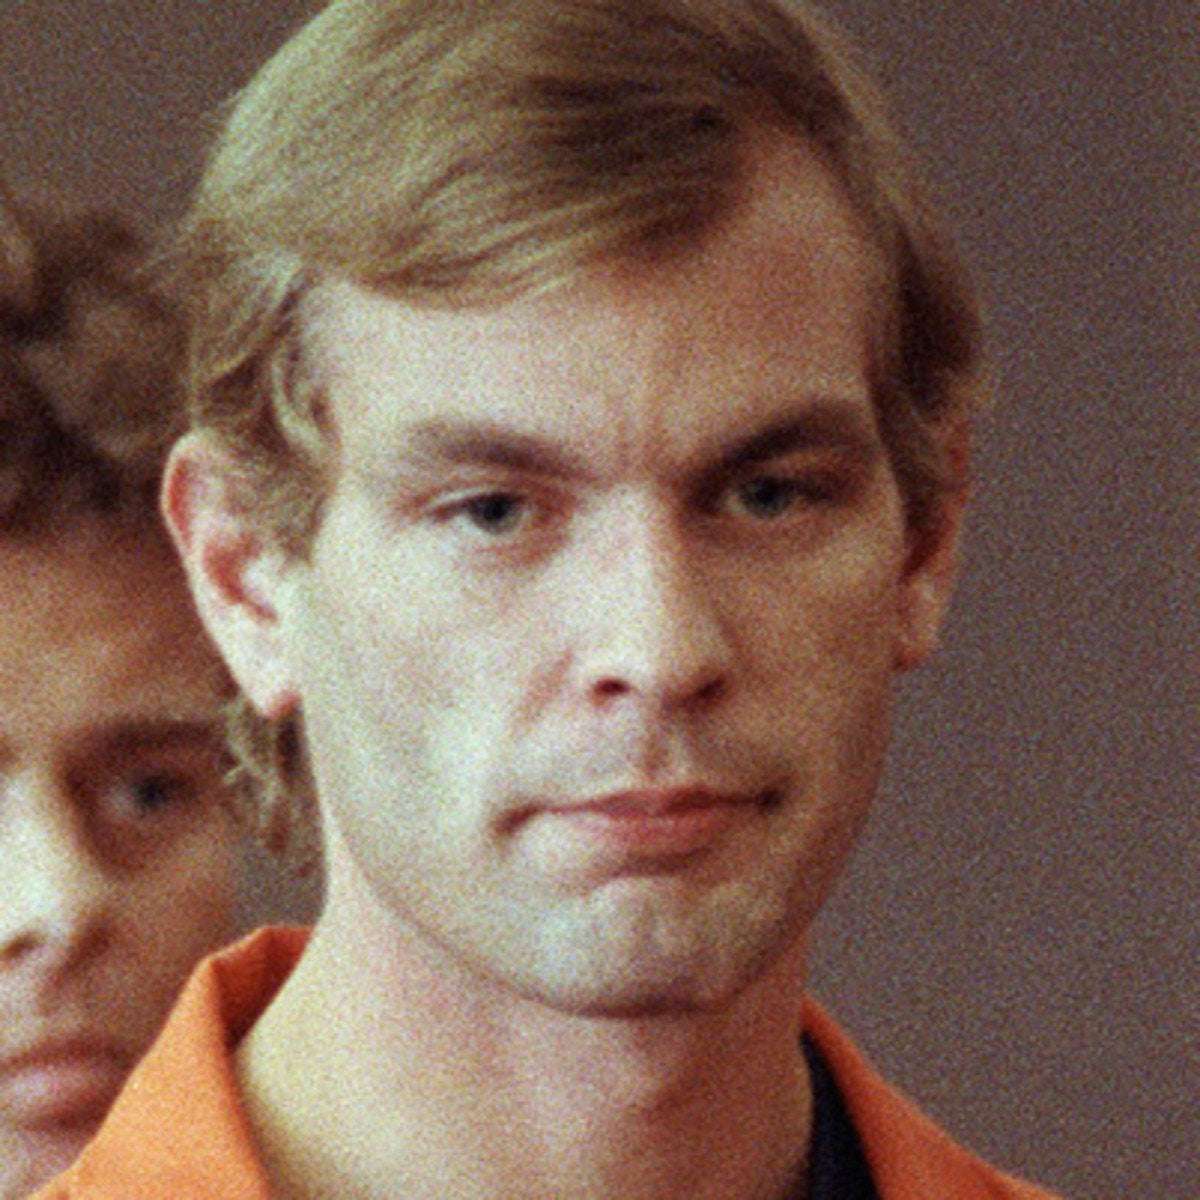 image for TIL Serial killer and cannibal Jeffrey Dahmer was brutally killed in prison when another inmate beat him to death with a metal bar taken from the prison weight room. The killer later revealed that he was sickened by Dahmer's crimes and his habit of fashioning severed limbs from the prison food.